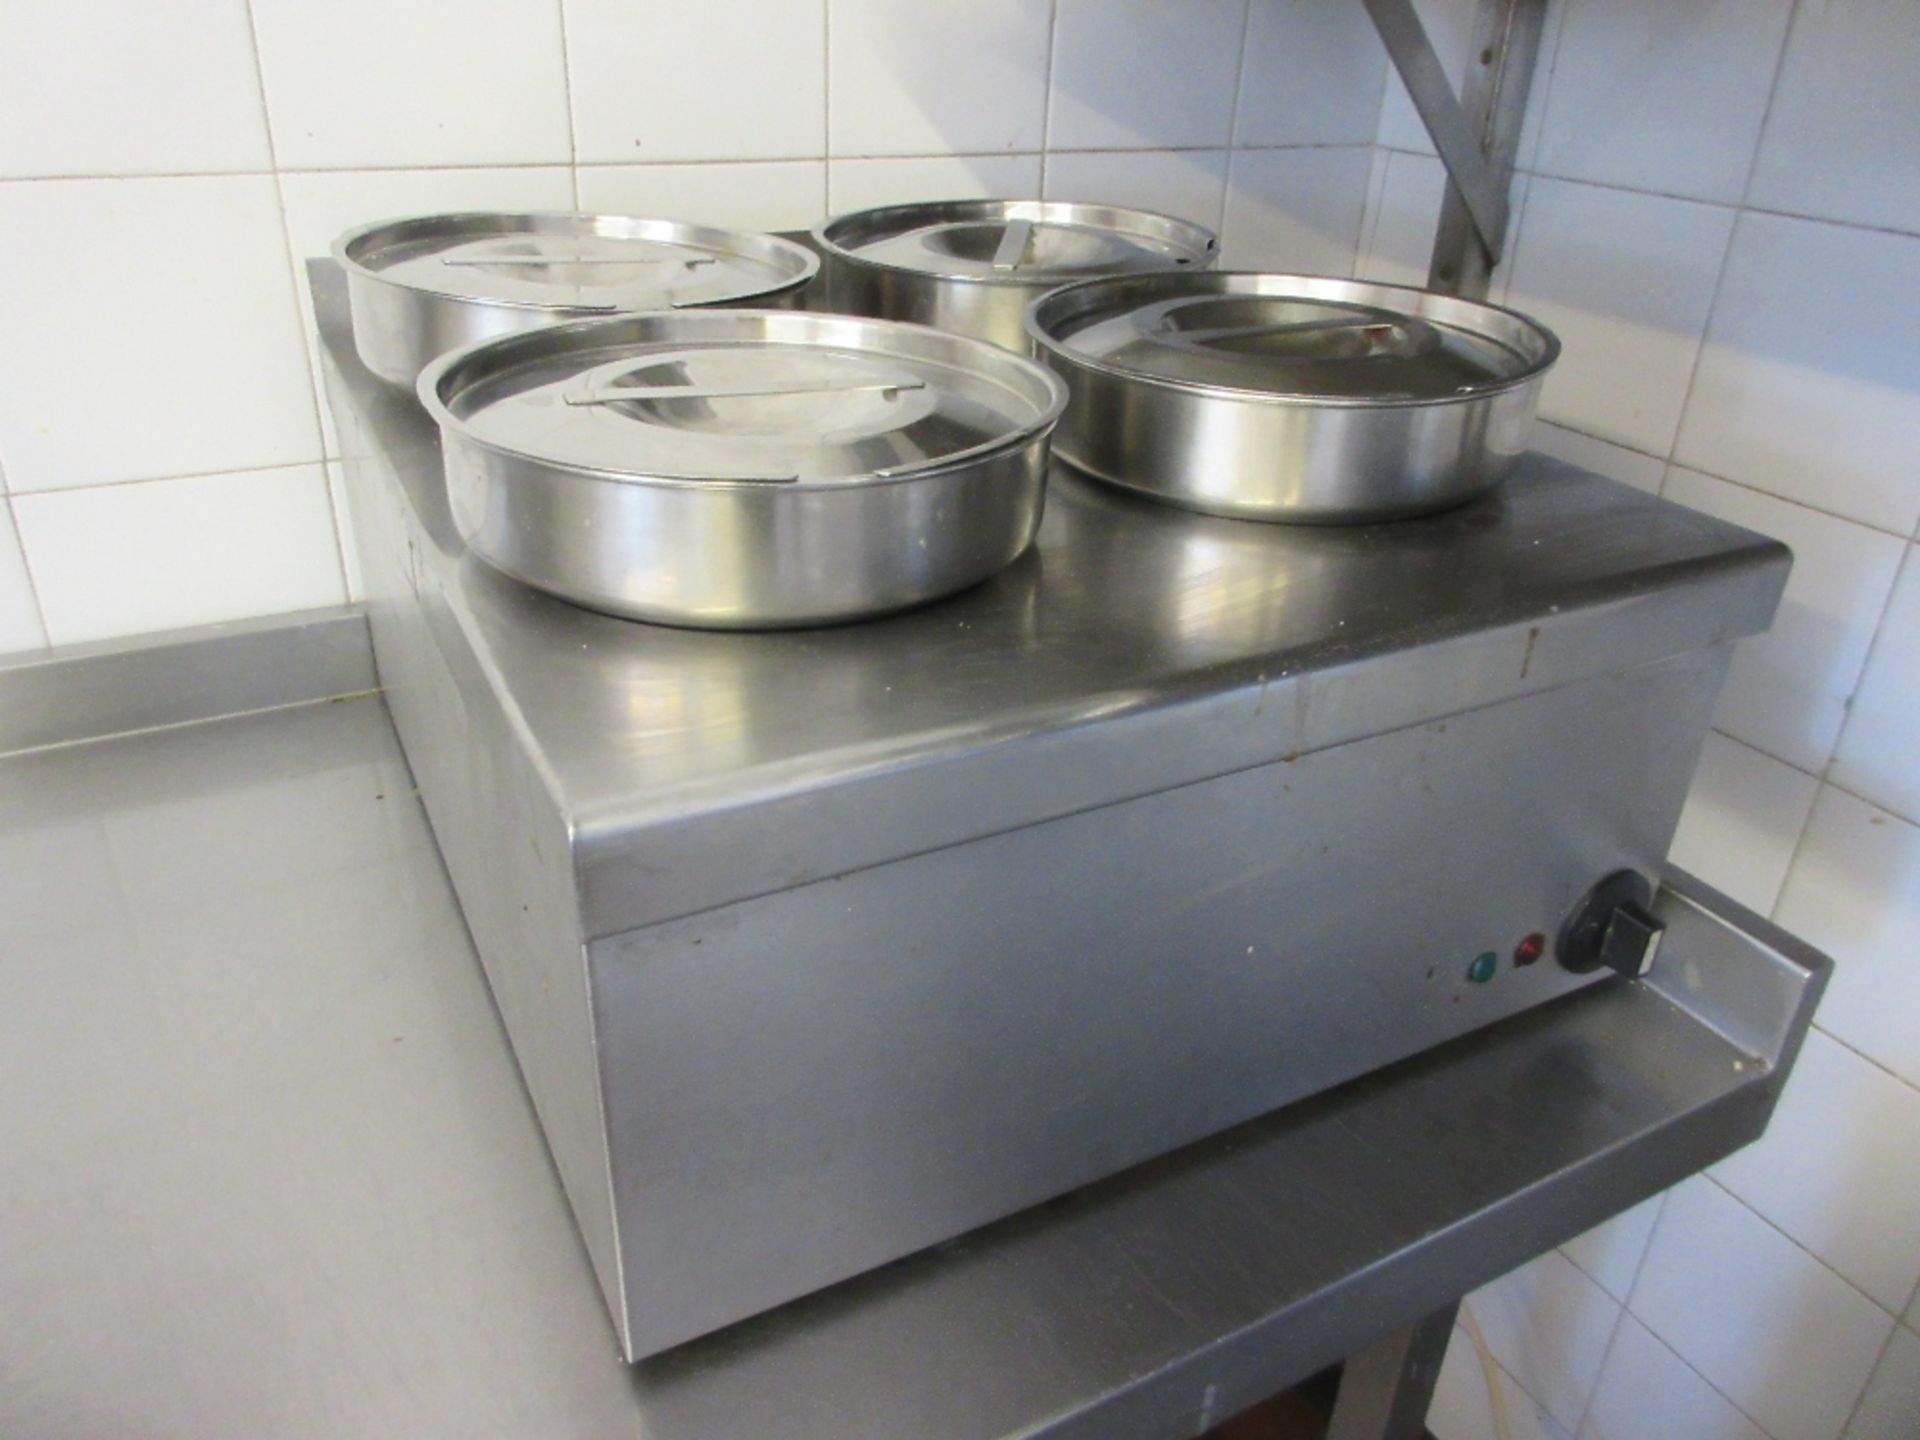 Stainless steel 4 pot ban marie